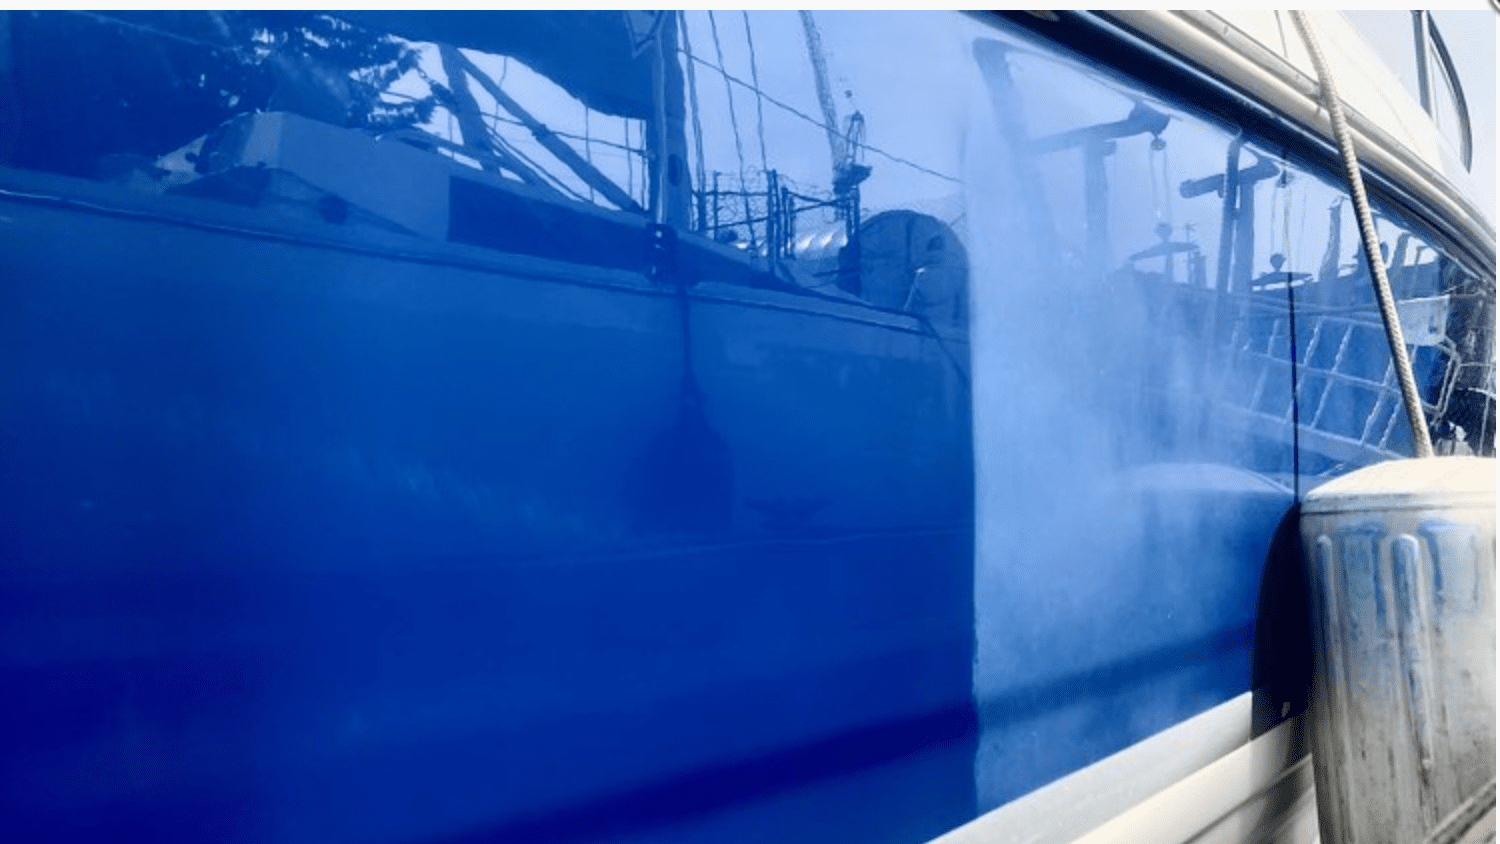 A blue boat is reflected in the mirror.